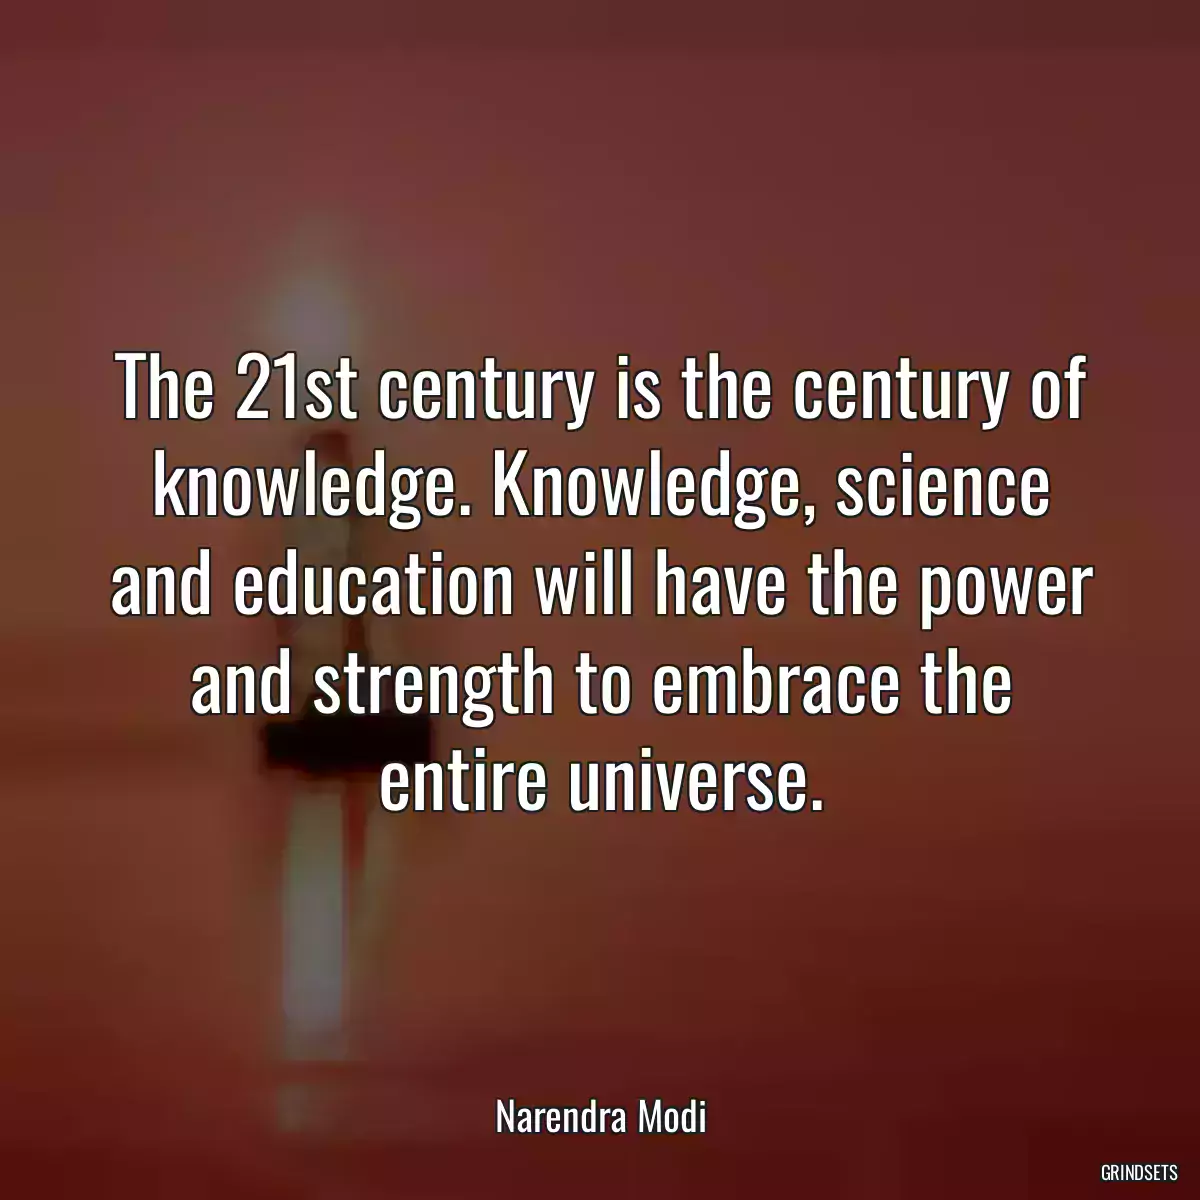 The 21st century is the century of knowledge. Knowledge, science and education will have the power and strength to embrace the entire universe.